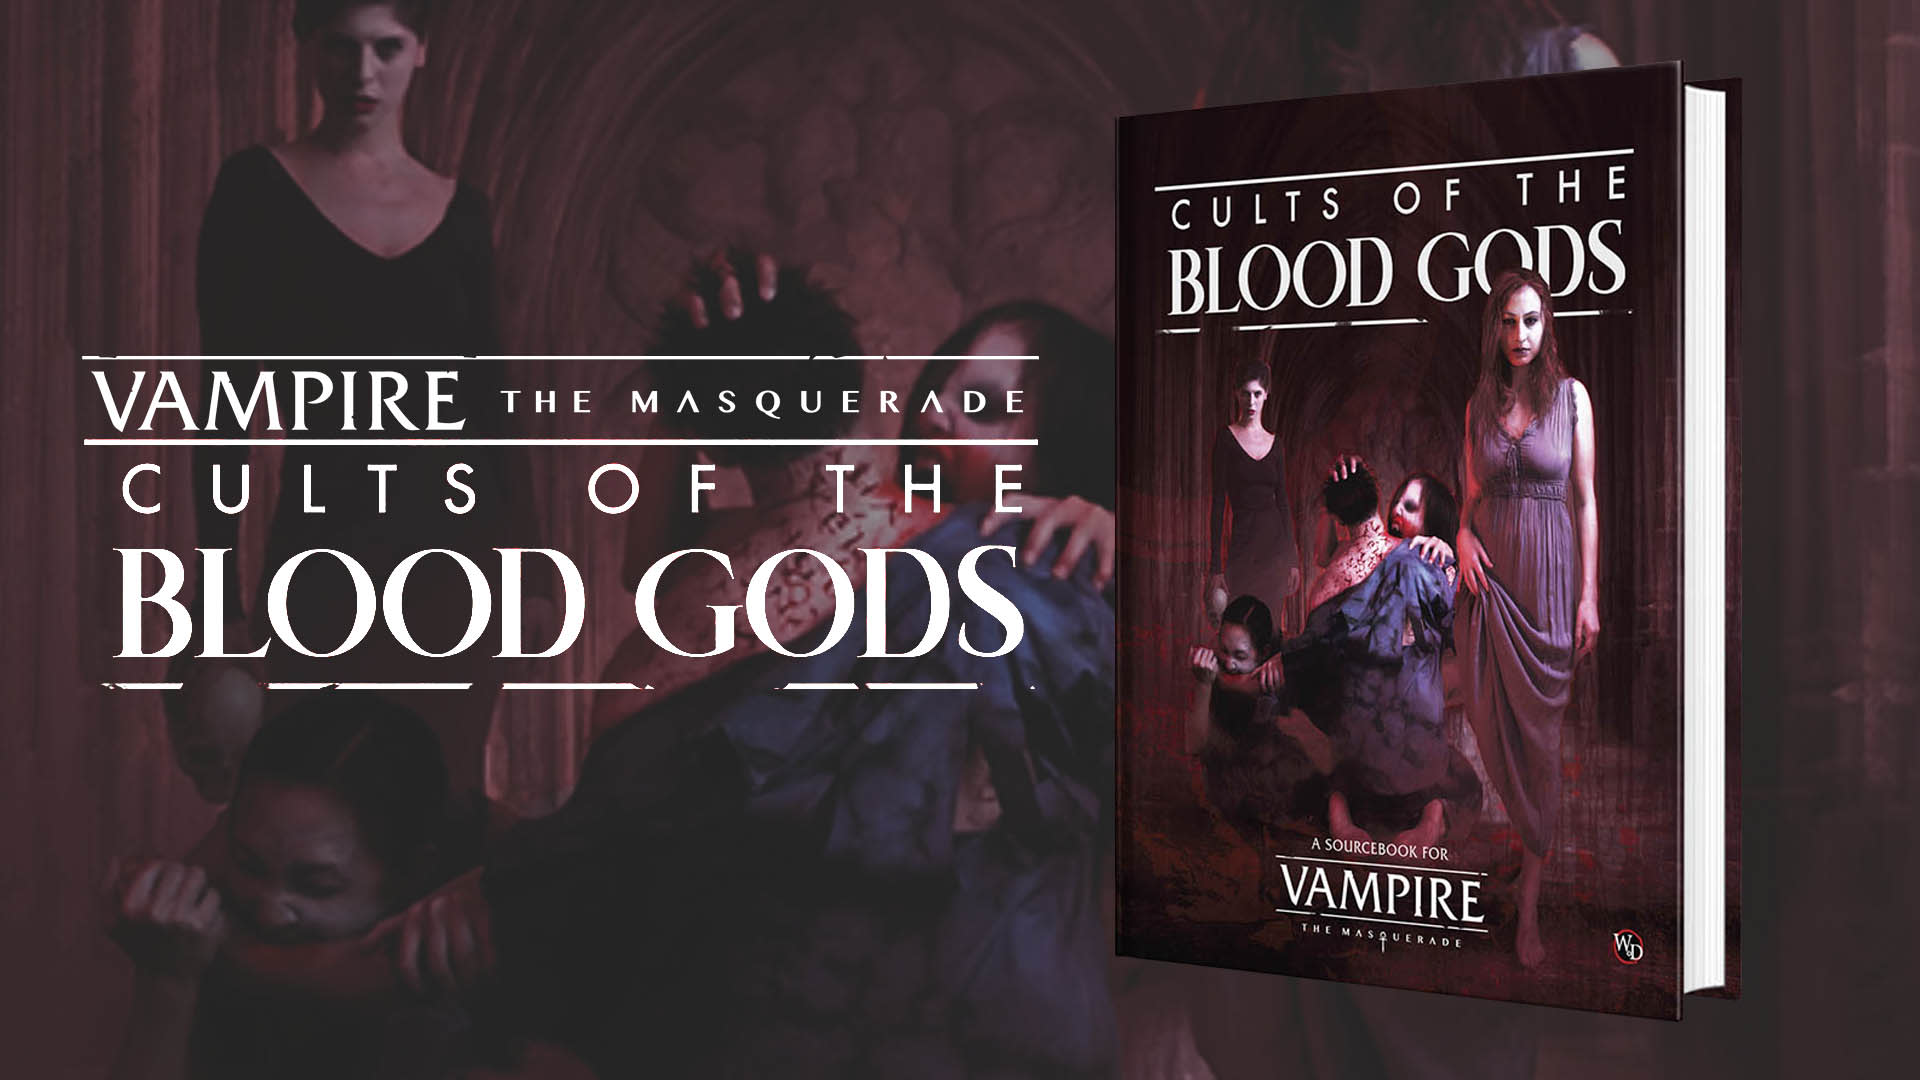 Vampire: The Masquerade Cults of the Blood Gods